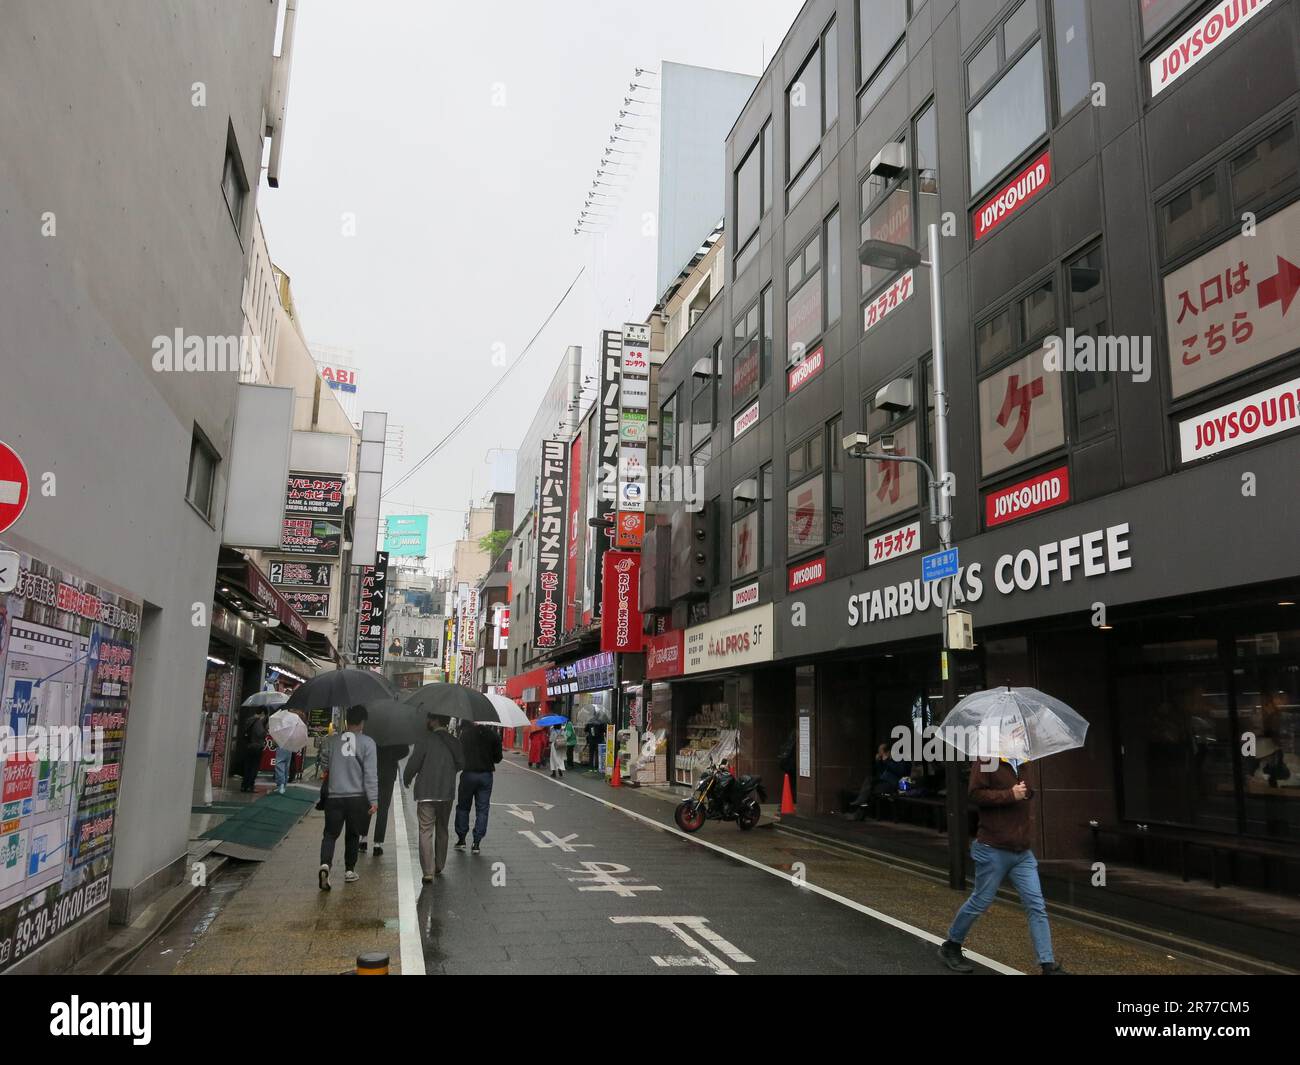 The western district around Japan's busiest station, Shinjuku, is full of busy streets with restaurants & shops including Starbucks Coffee. Stock Photo